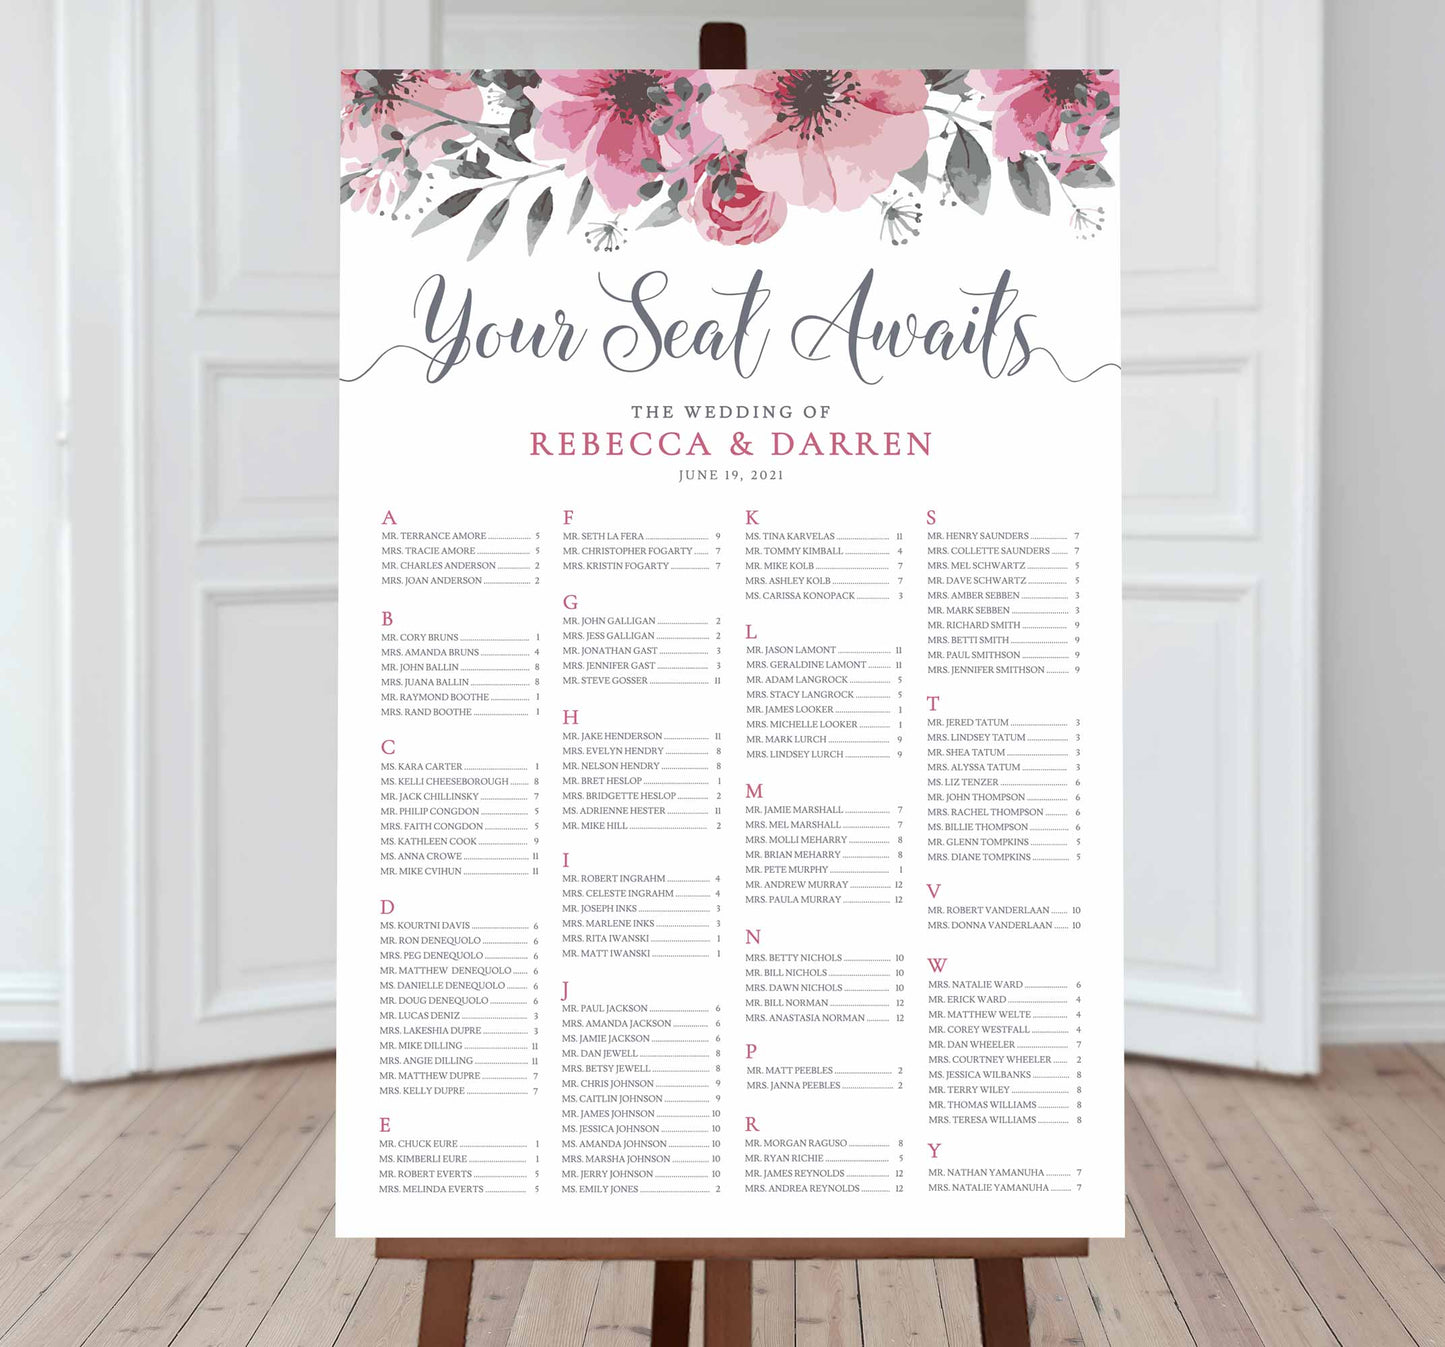 large wedding flowers alphabetical seating chart with 200 guests